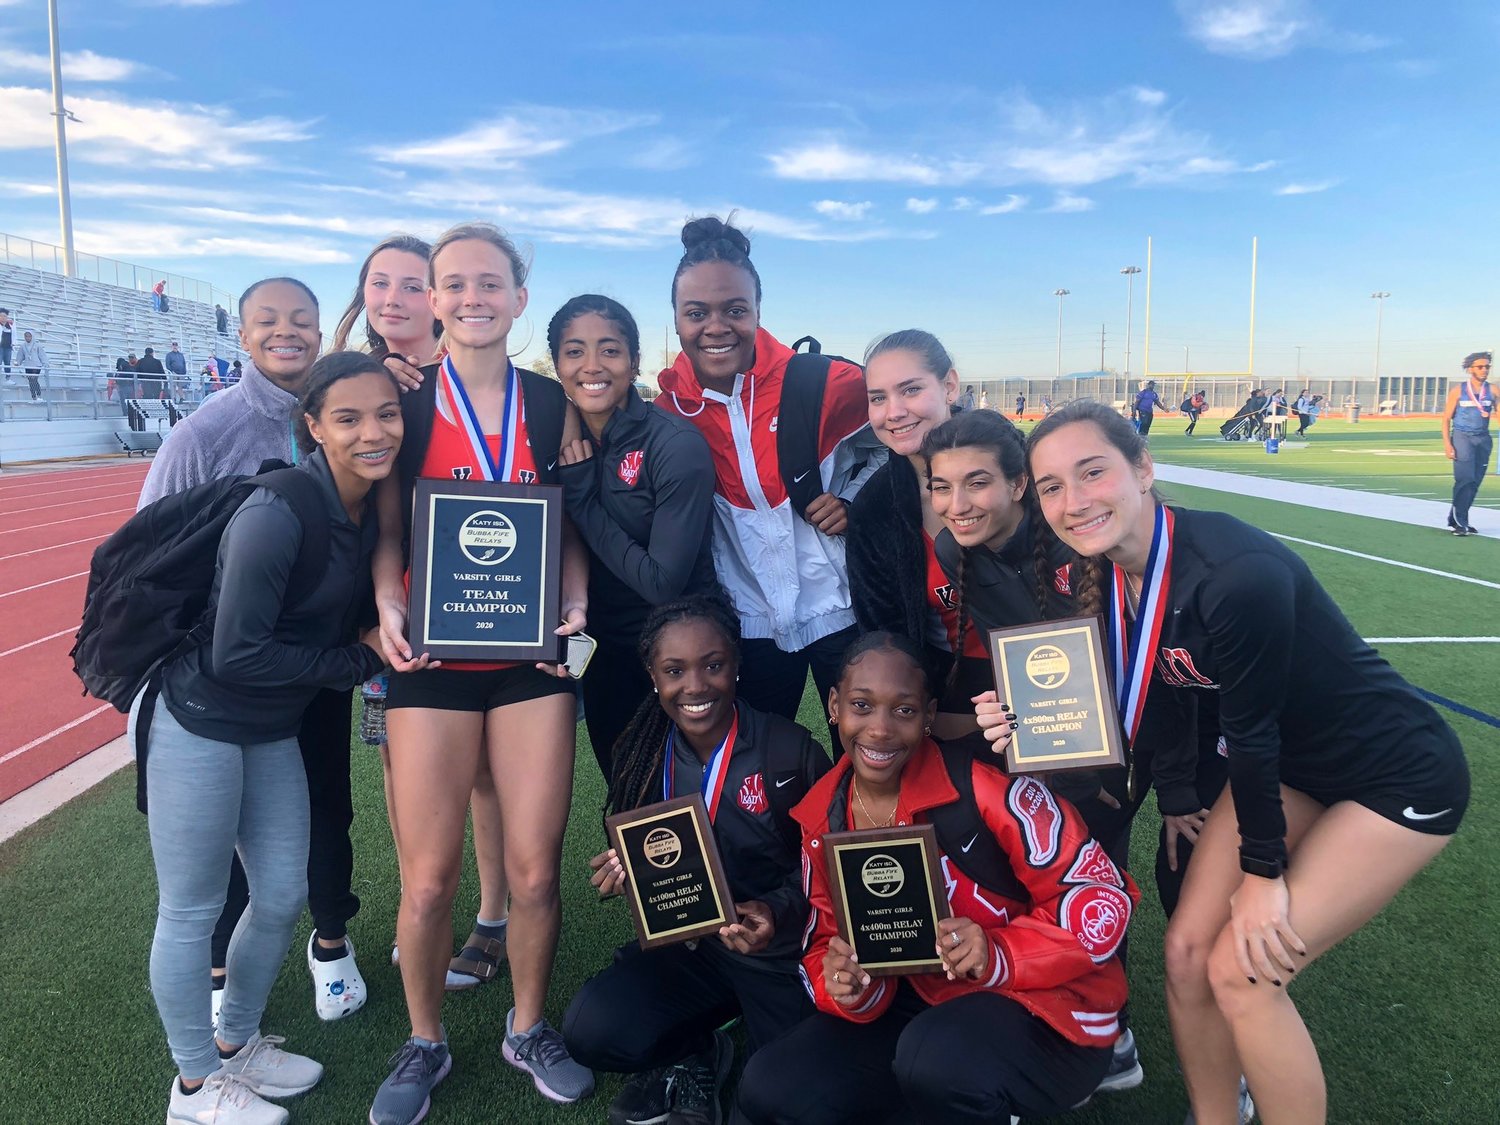 Katy High’s girls won the team championship at the Bubba Fife Relays on Feb. 29 at Paetow High, scoring 131 points in a 26-team field.